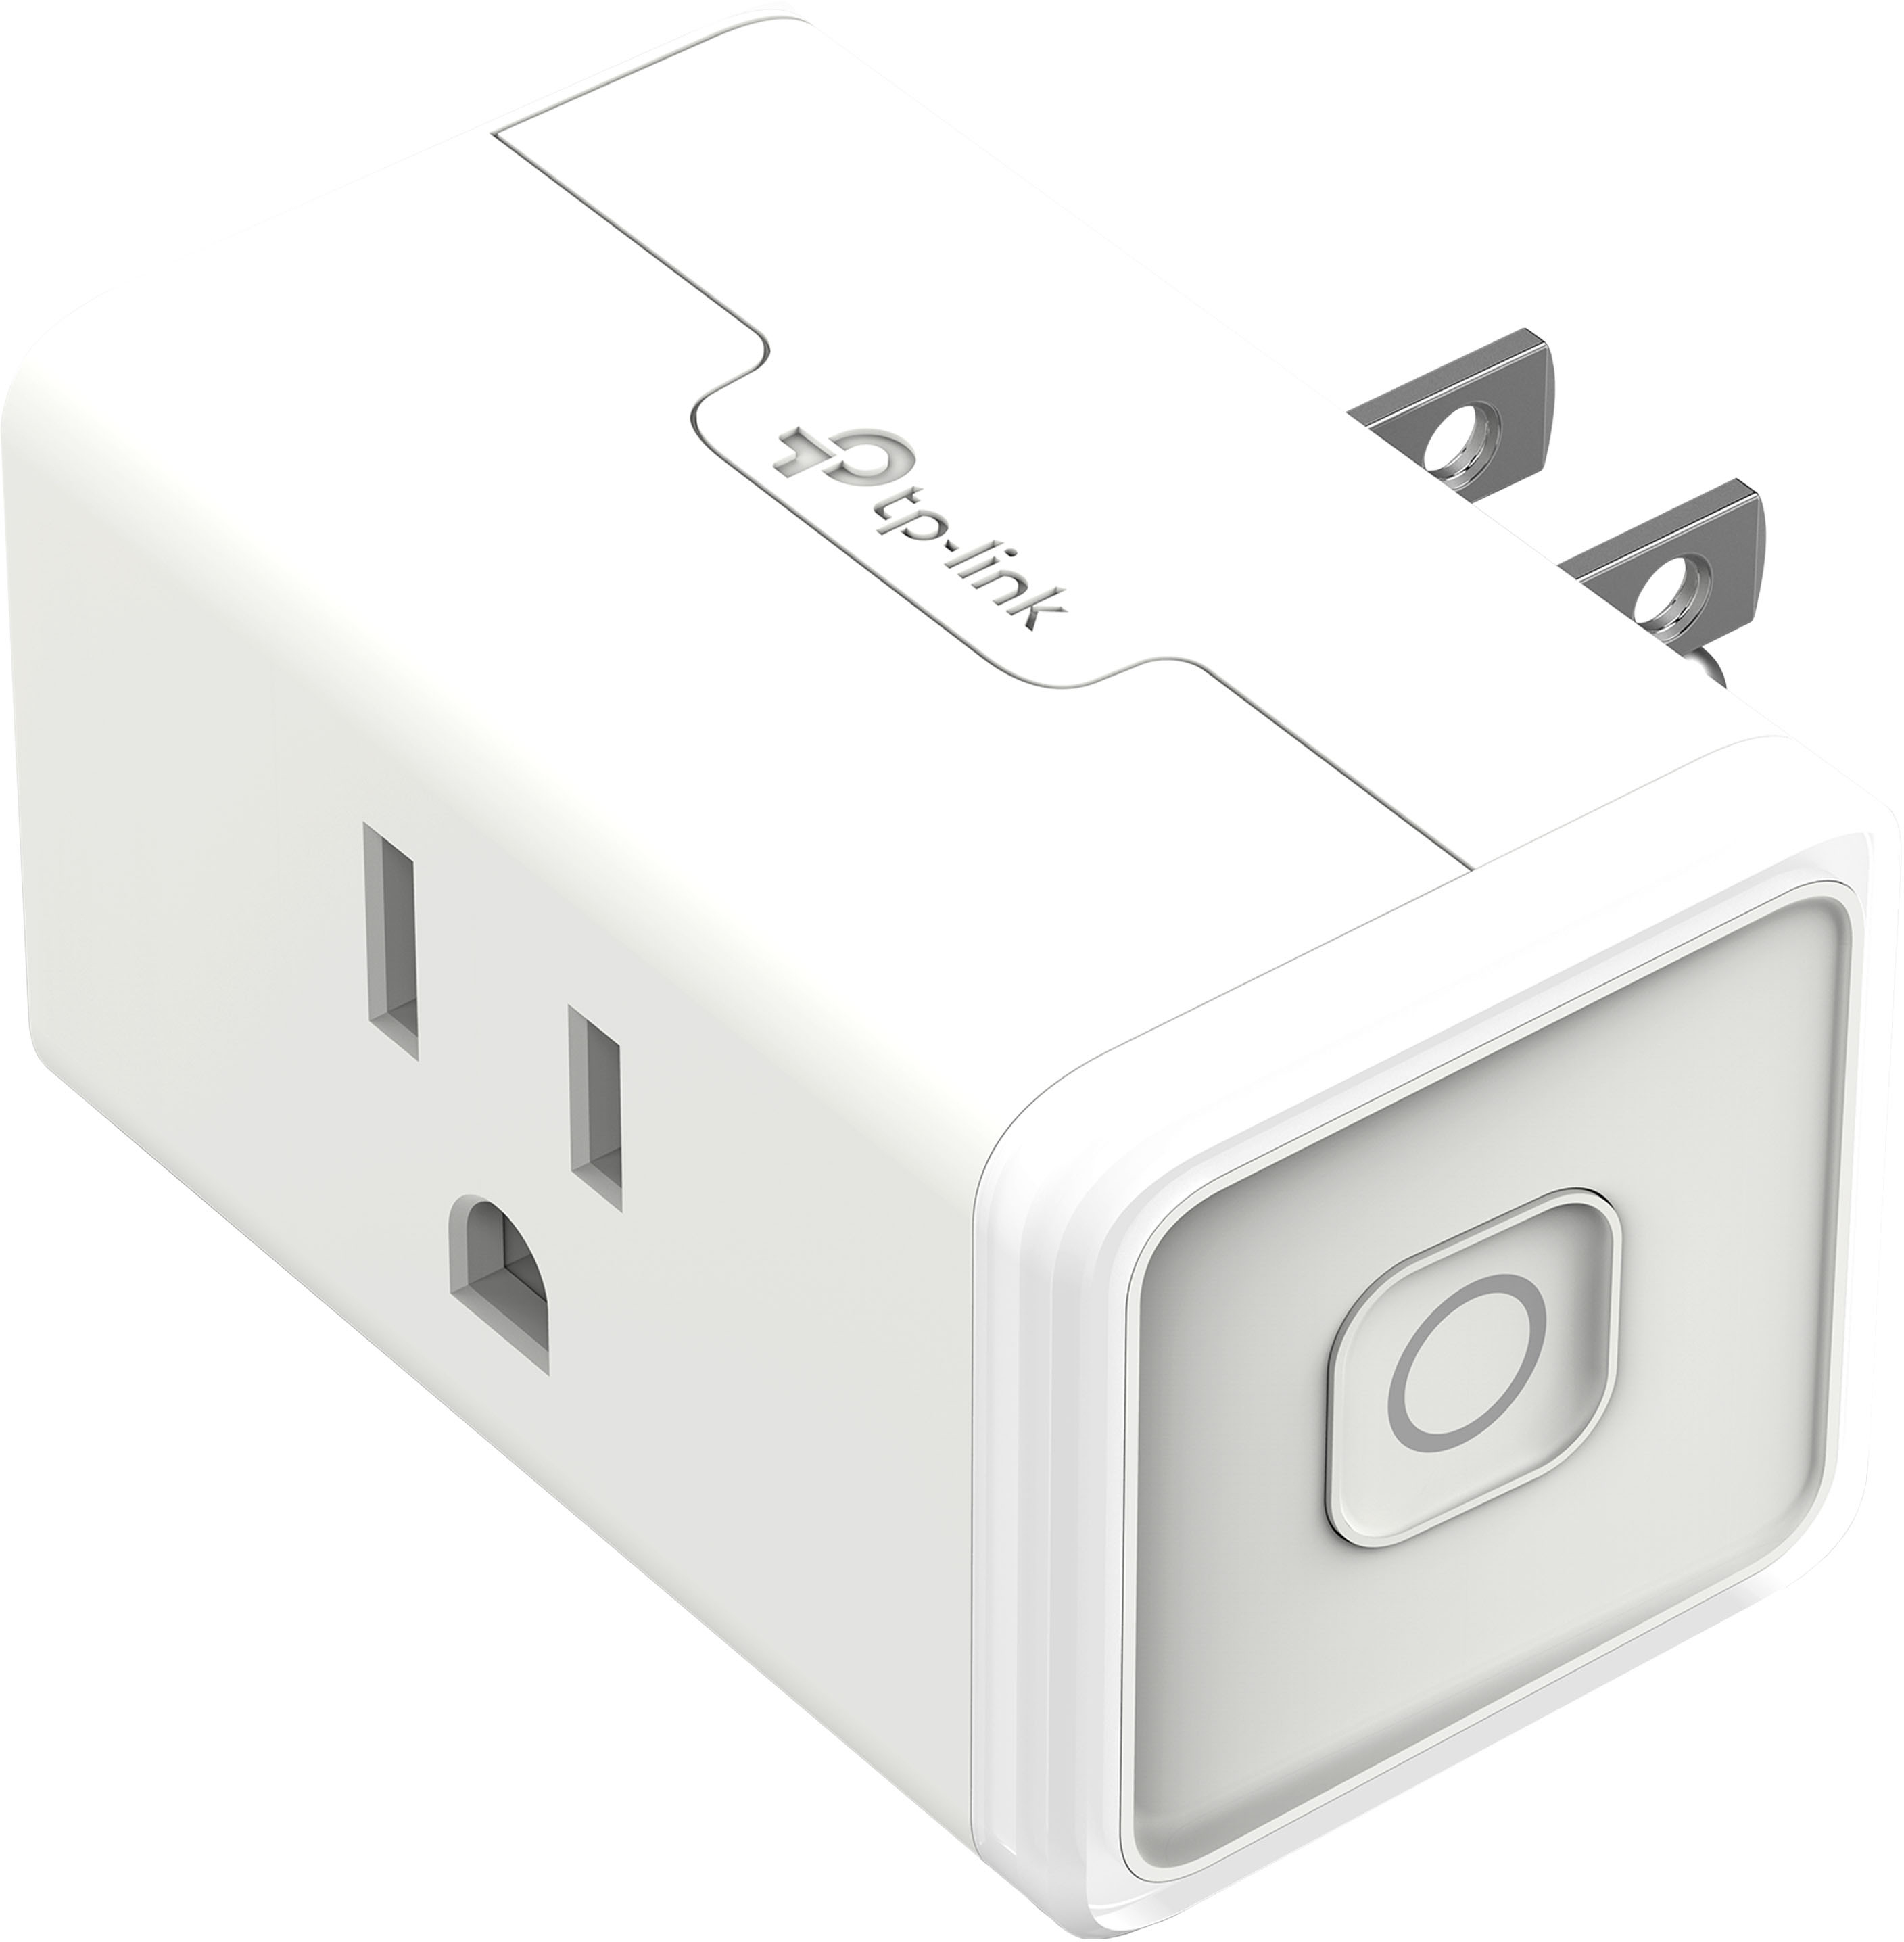 TP-Link Kasa KP125M smart plug review: Matter is here, with a catch